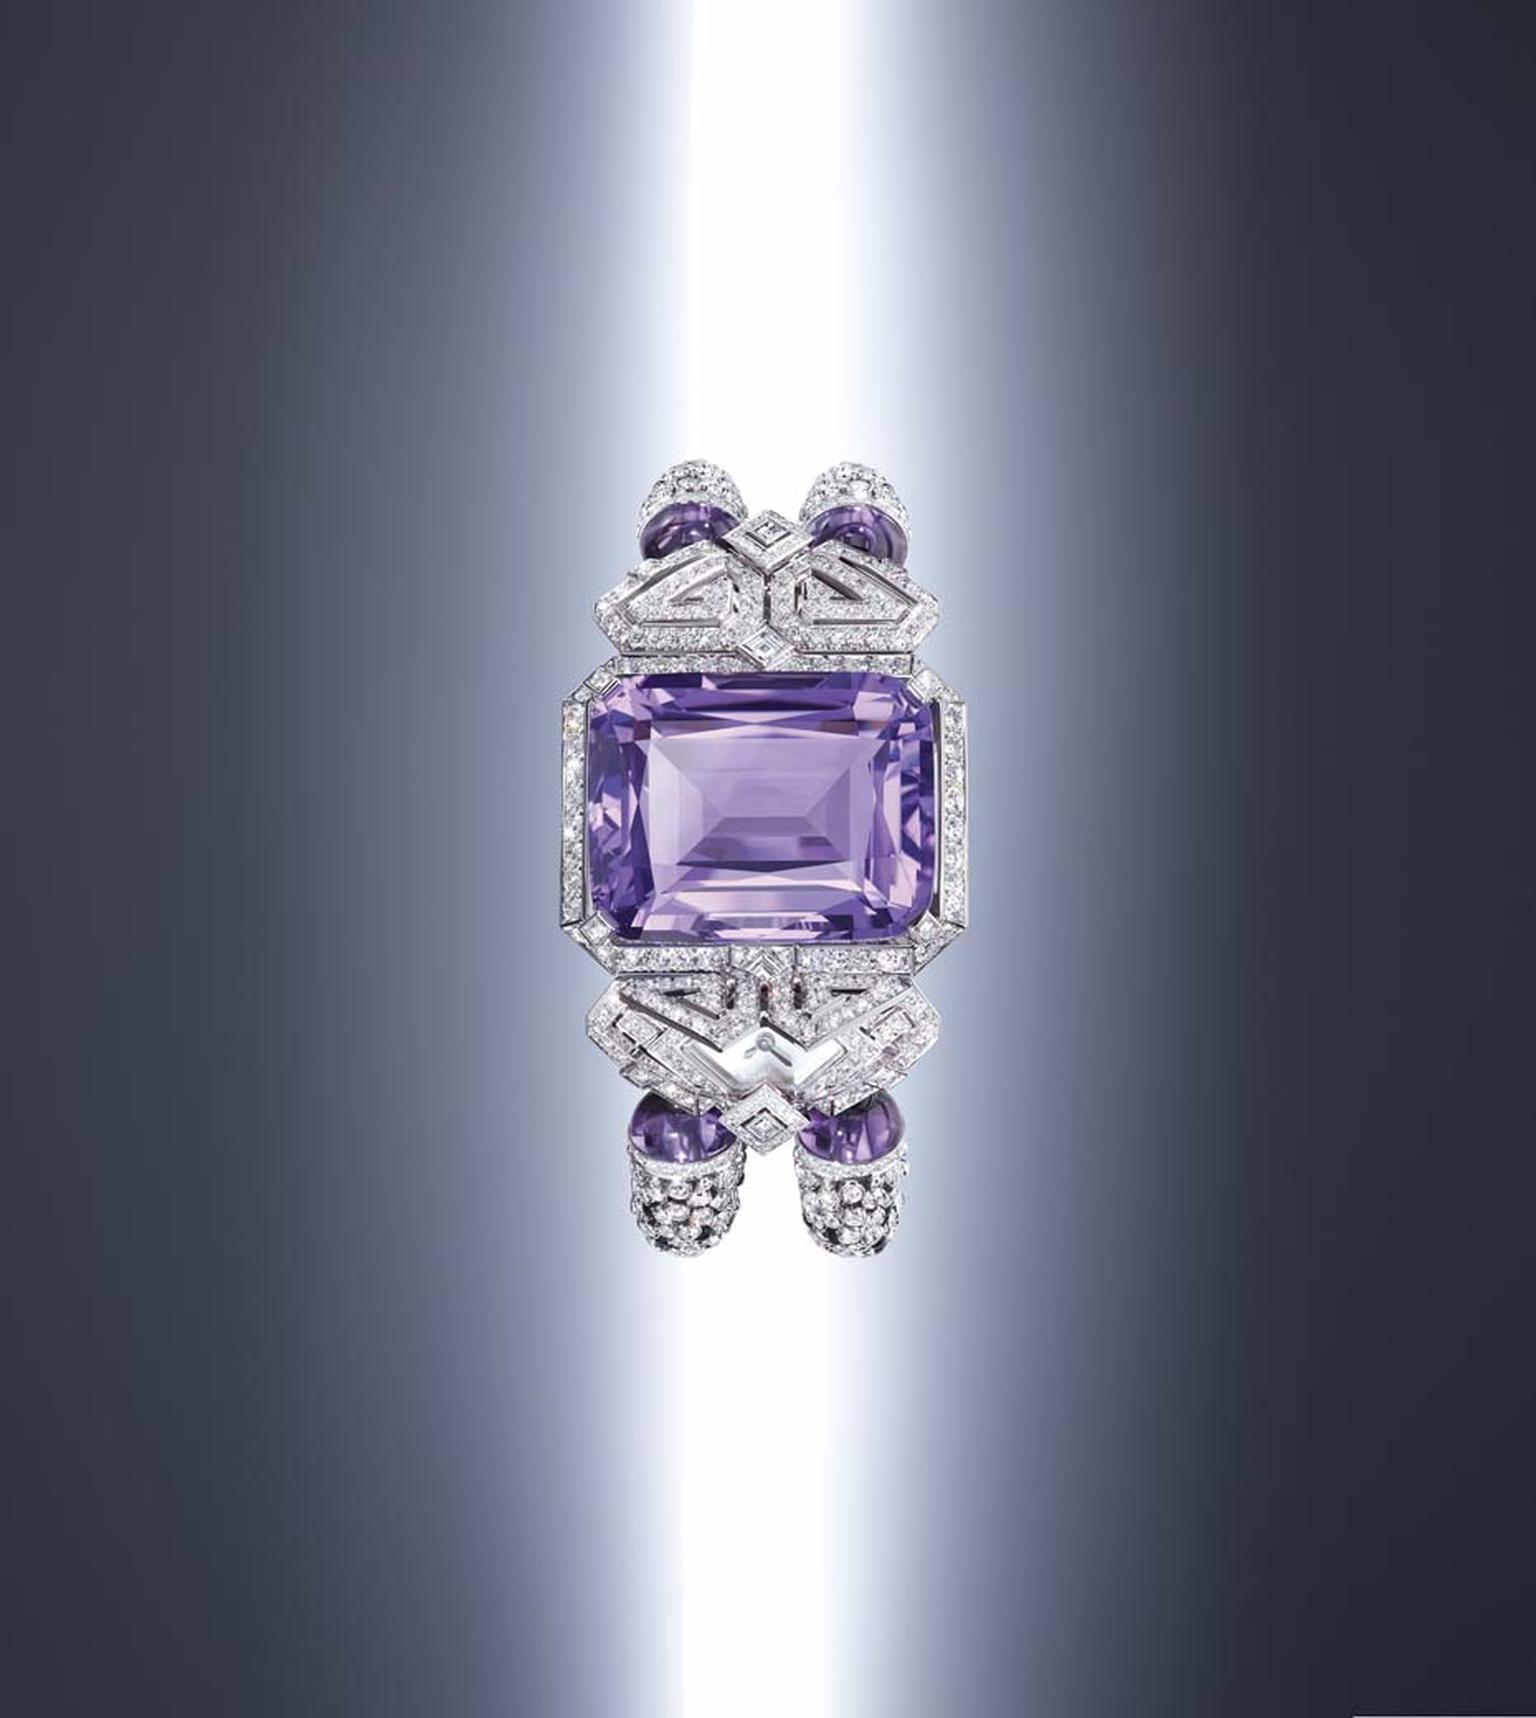 Cartier Purple high jewellery secret watch marries a marvellous, cushion-shaped amethyst of 62.84 carats with a geometric, Art Deco frame punctuated with diamonds.